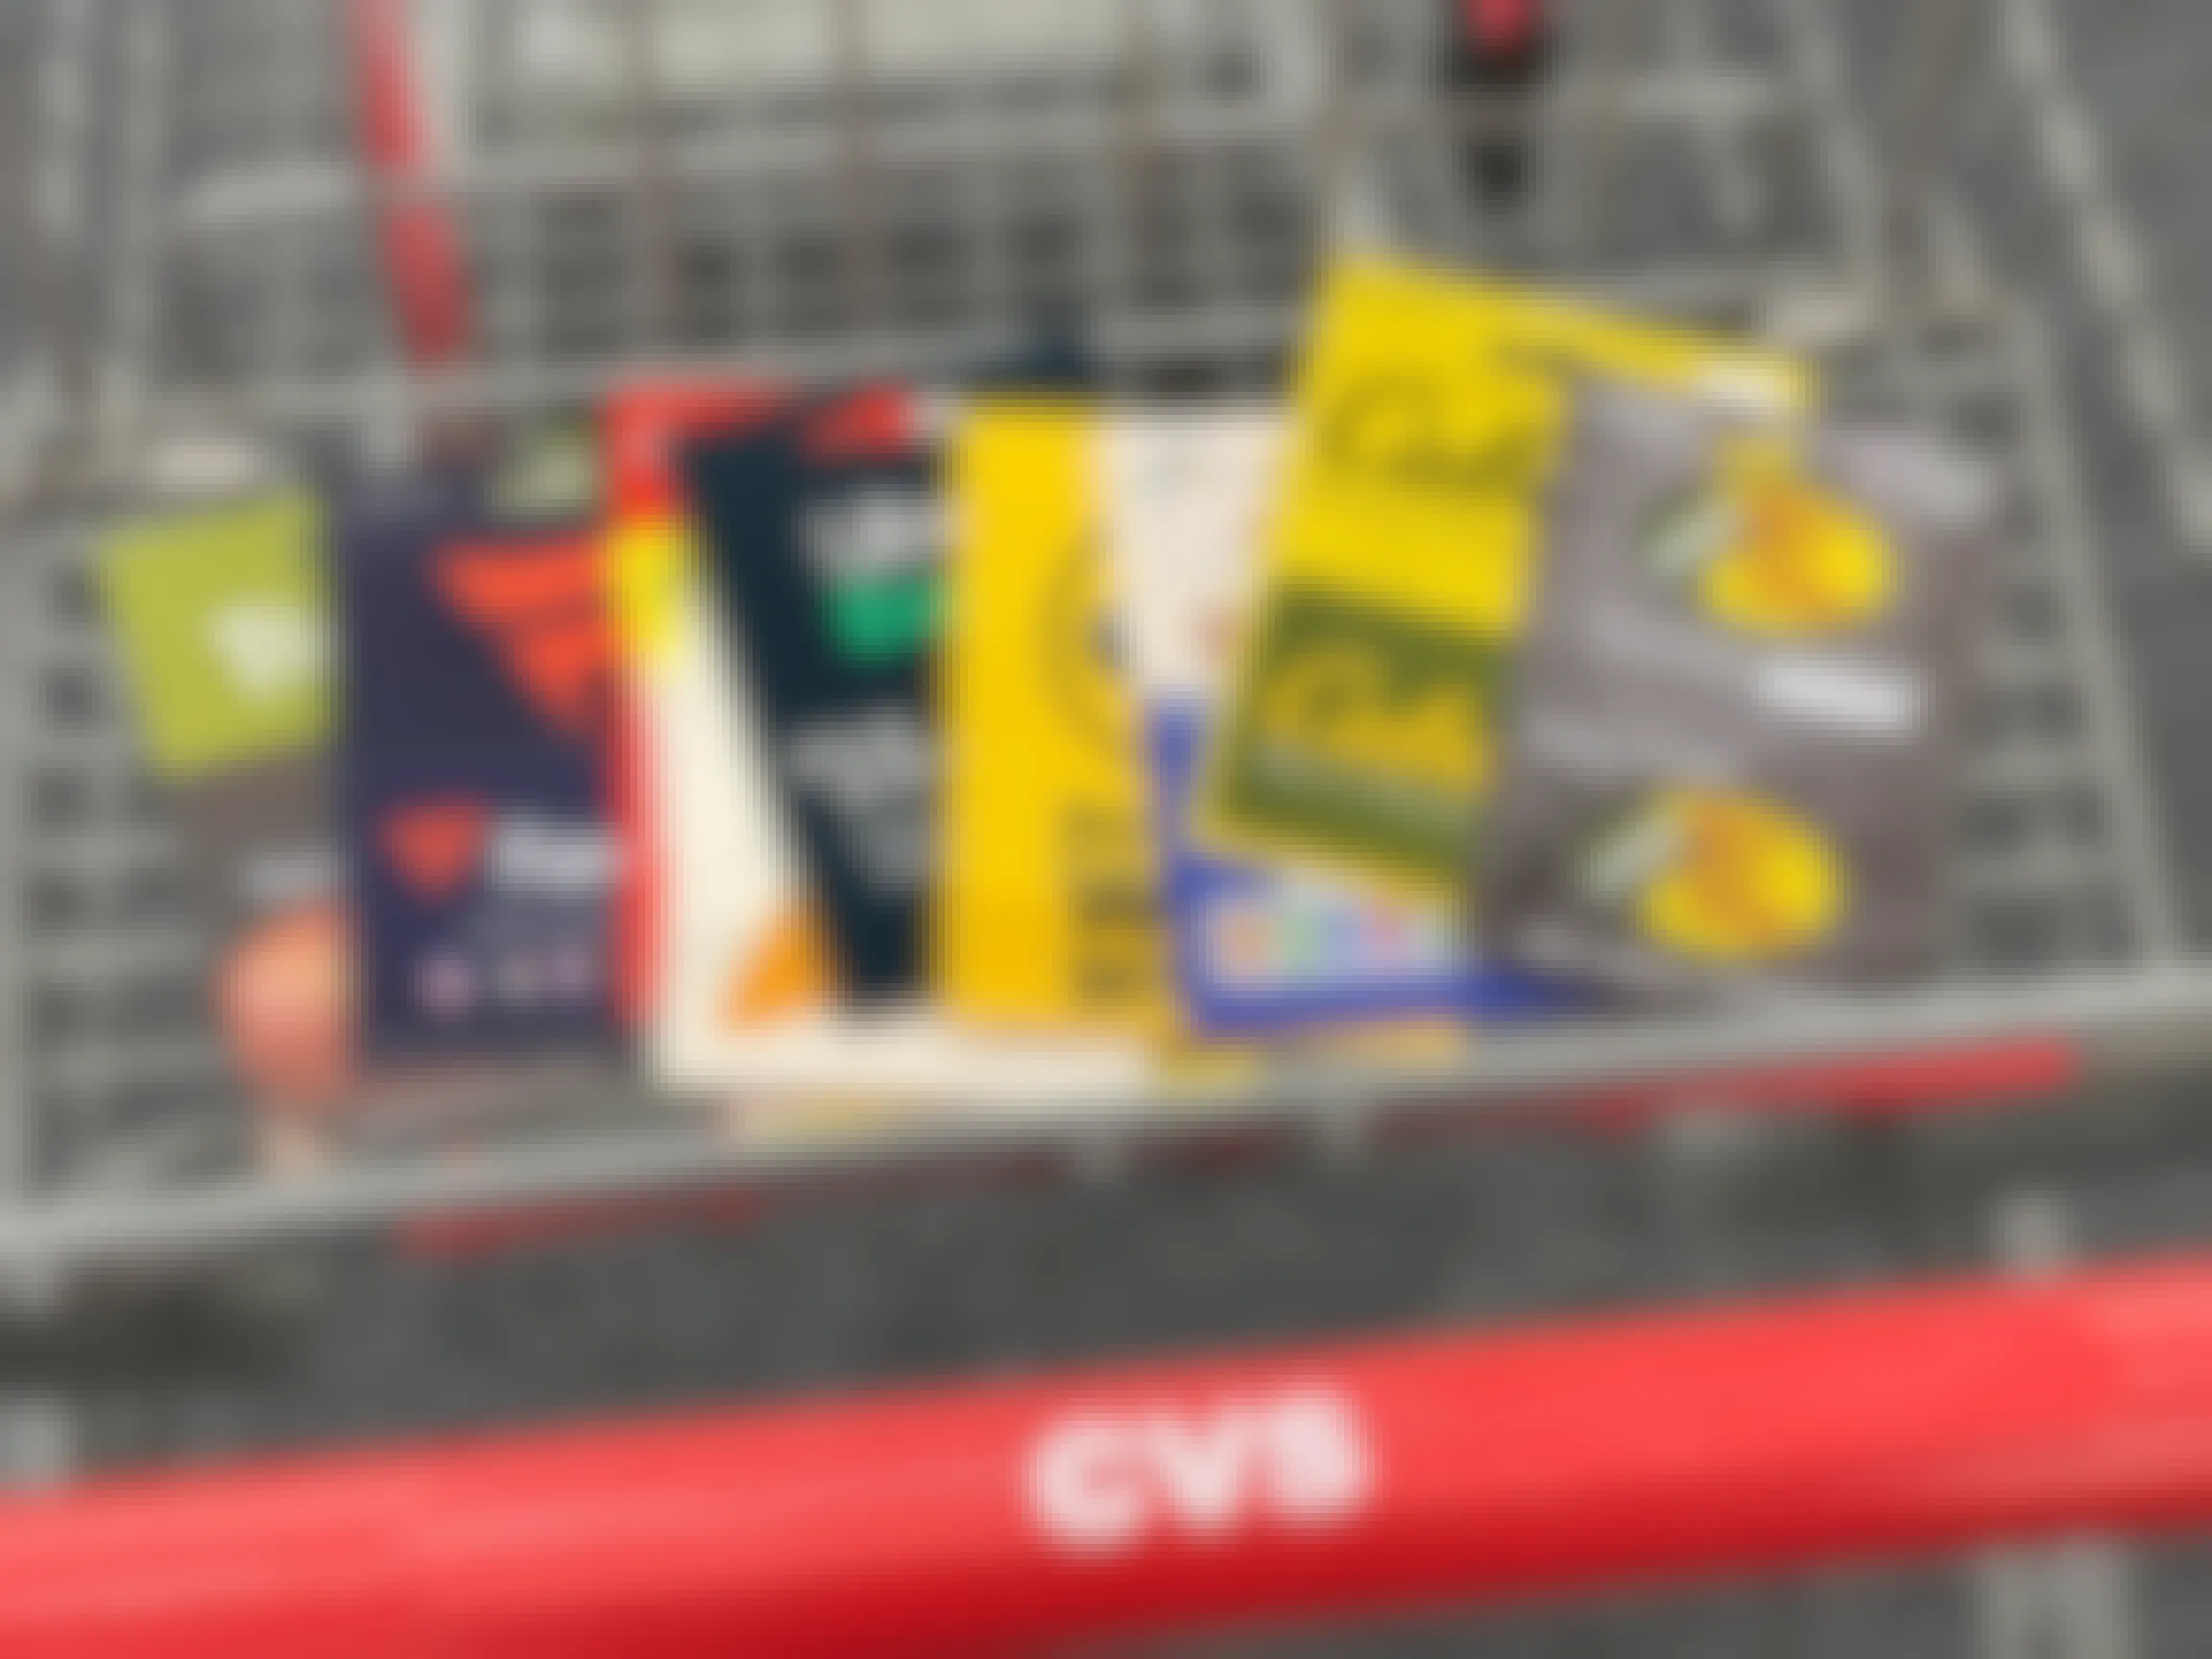 Several gift cards in a CVS cart